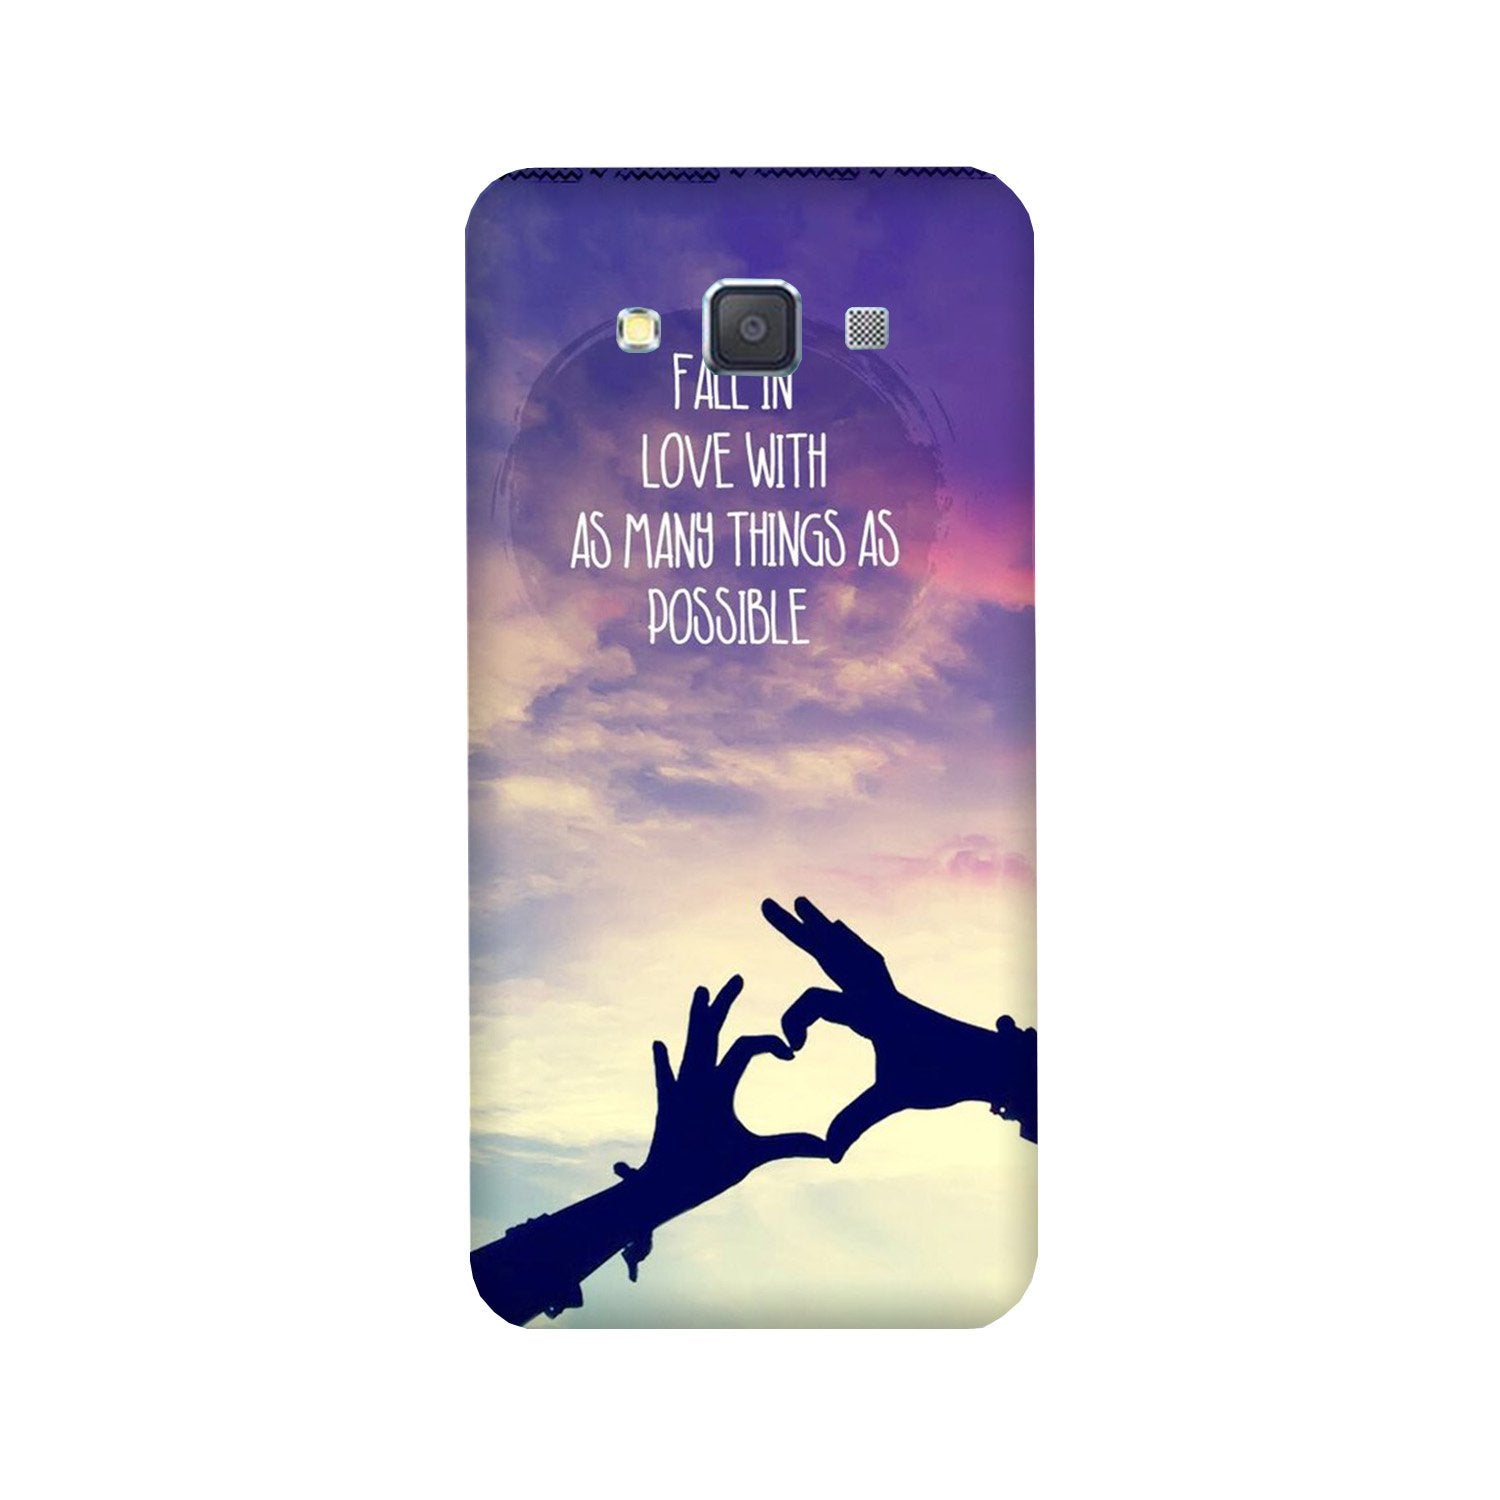 Fall in love Case for Galaxy Grand 2